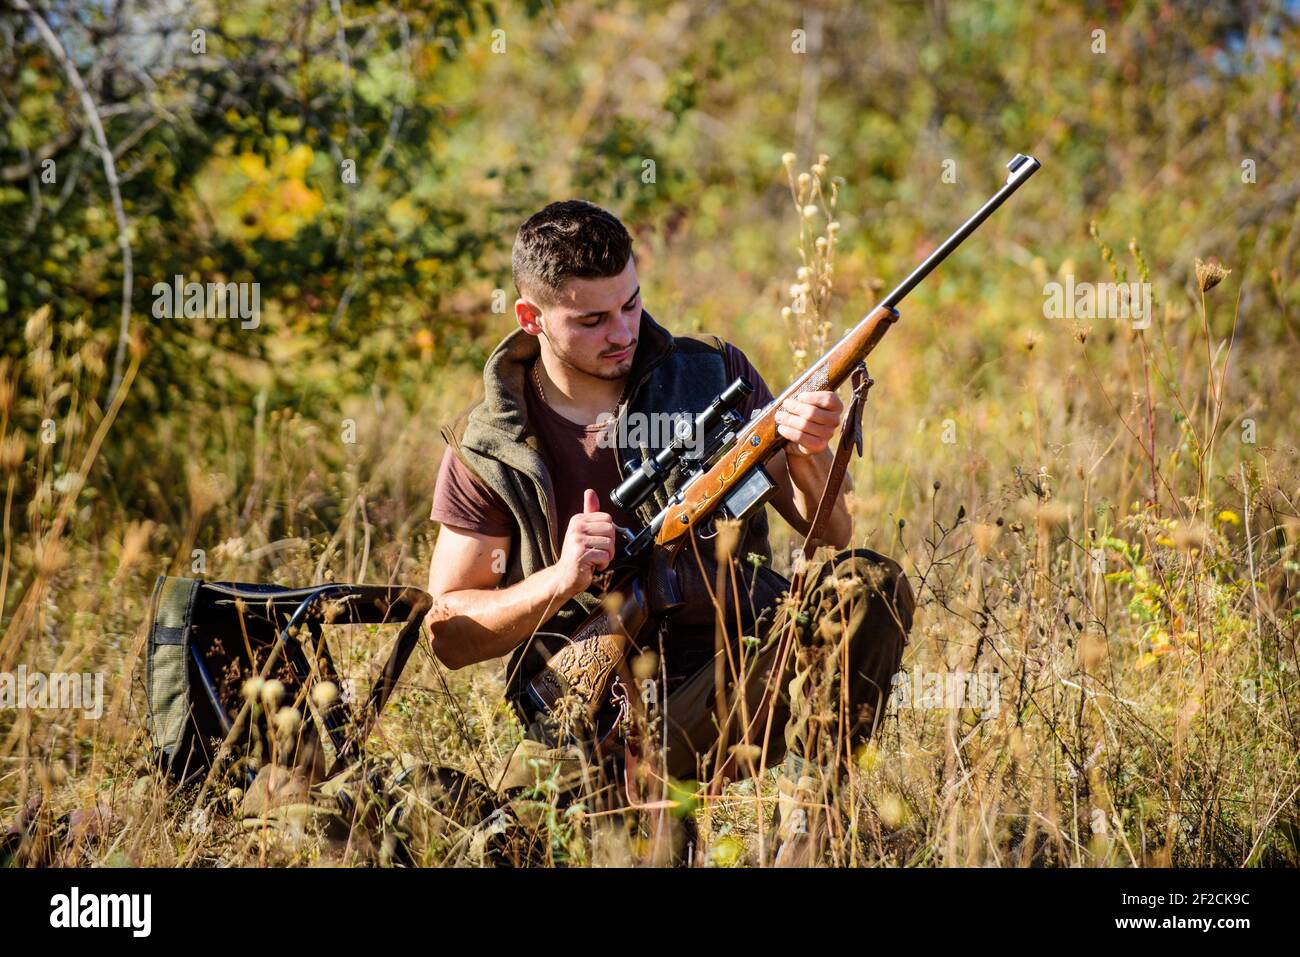 Hunting shooting trophy. Hunting hobby and leisure. Man charging hunting  rifle. Hunting equipment concept. Hunter with rifle looking for animal  Stock Photo - Alamy